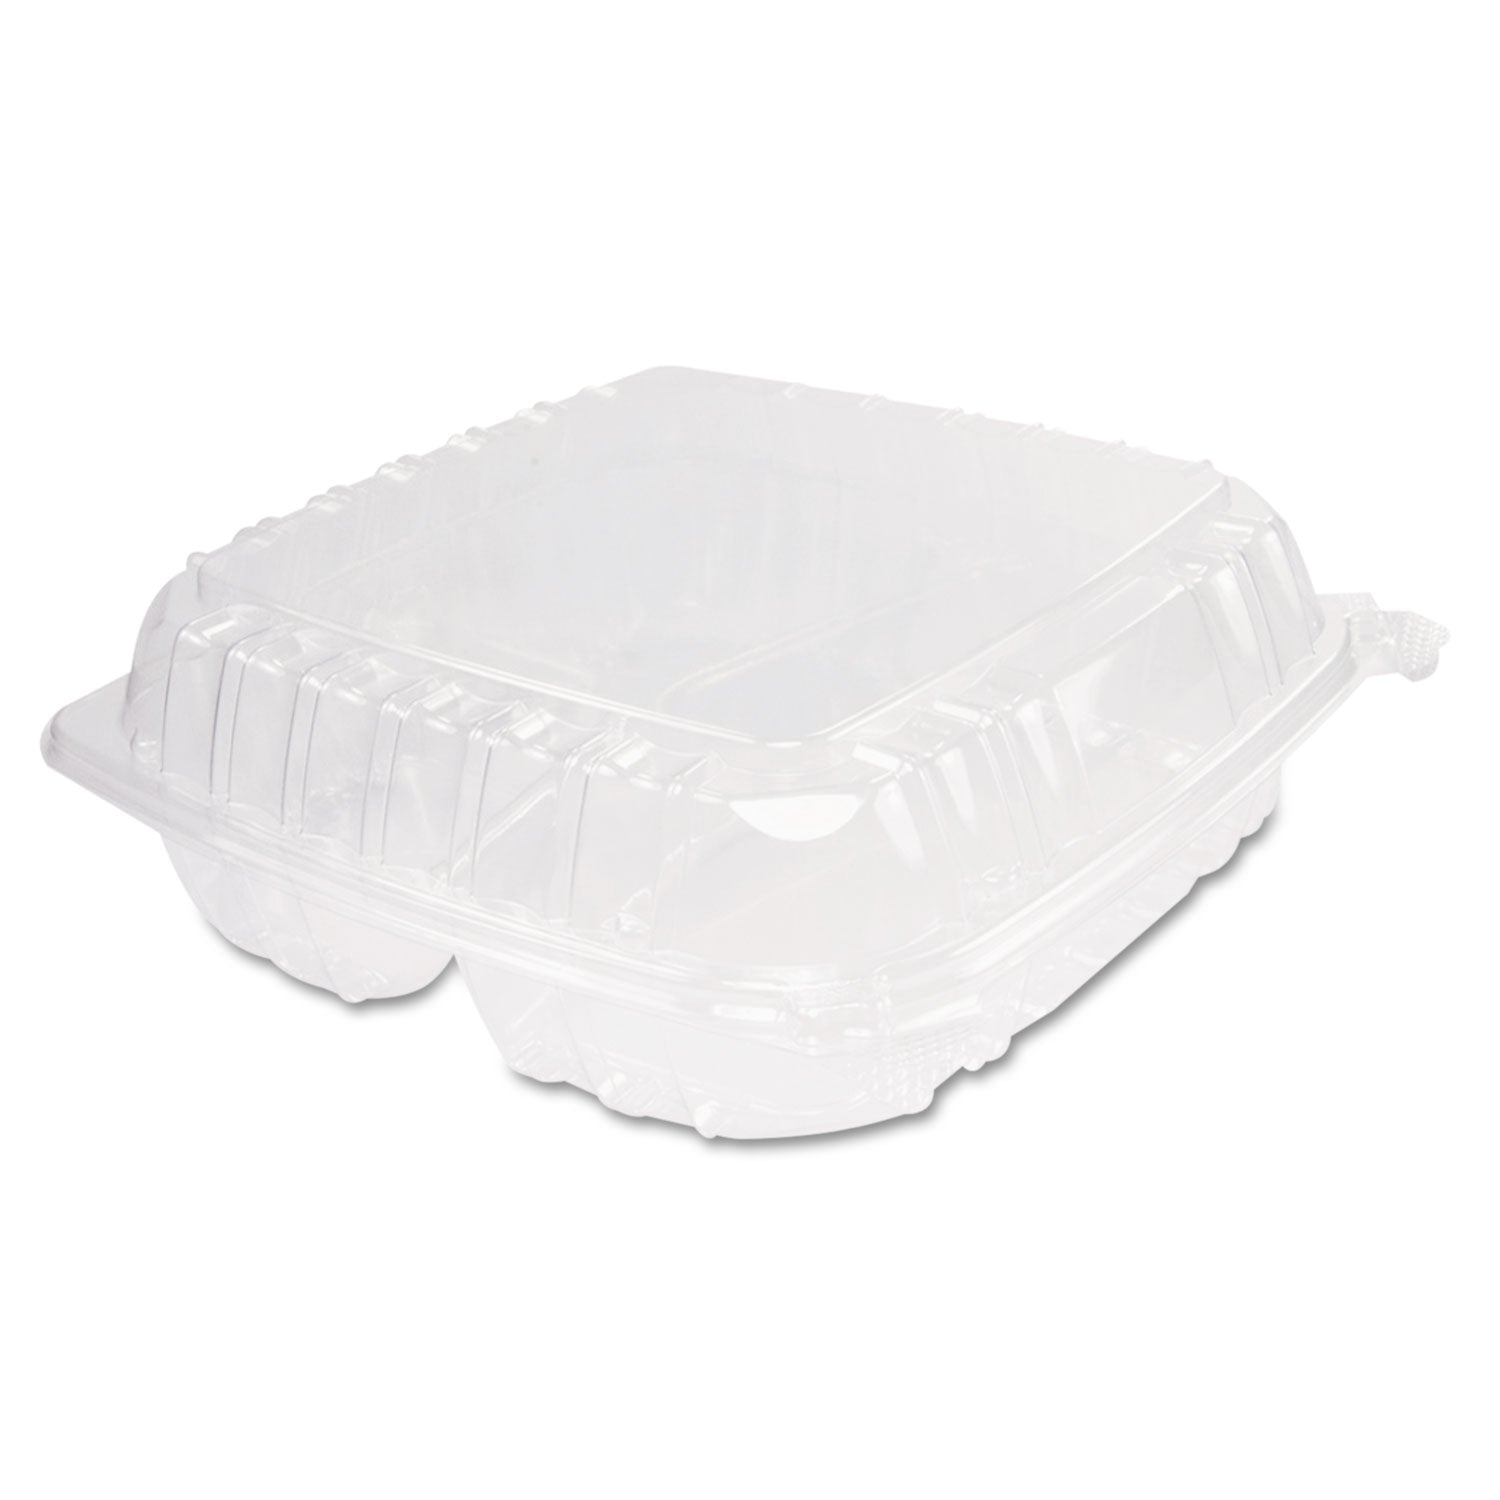 clearseal-hinged-lid-plastic-containers-3-compartment-94-x-89-x-3-plastic-100-bag-2-bags-carton_dccc95pst3 - 1